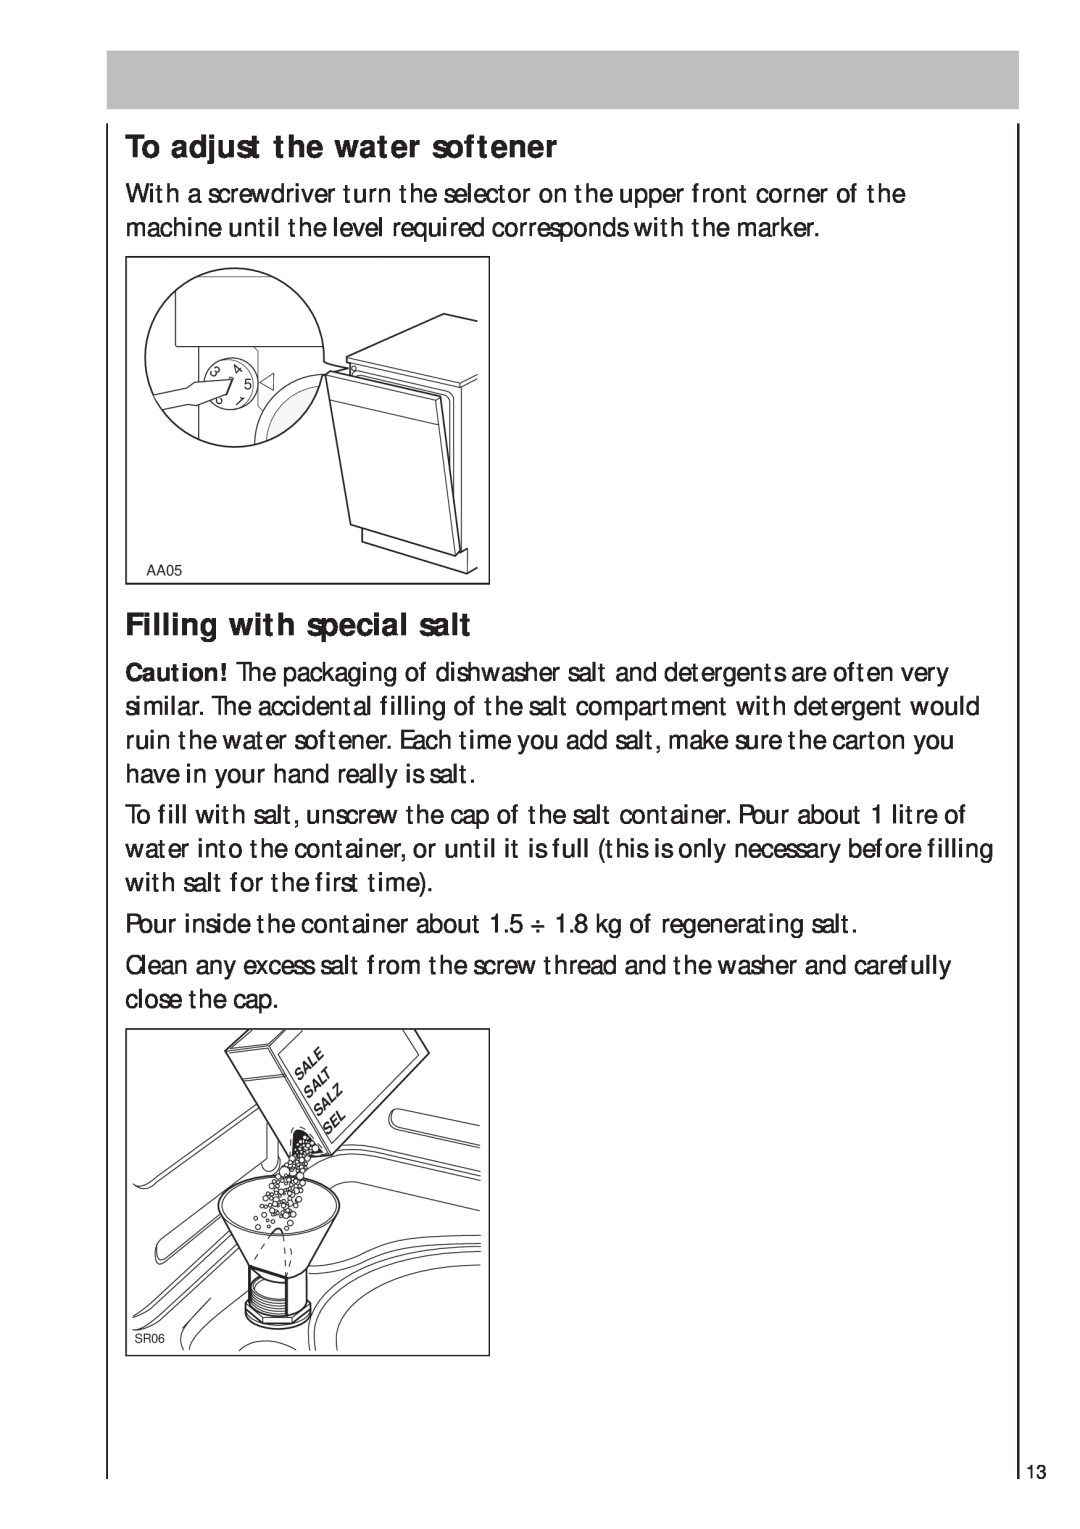 AEG 403 manual To adjust the water softener, Filling with special salt, AA05 